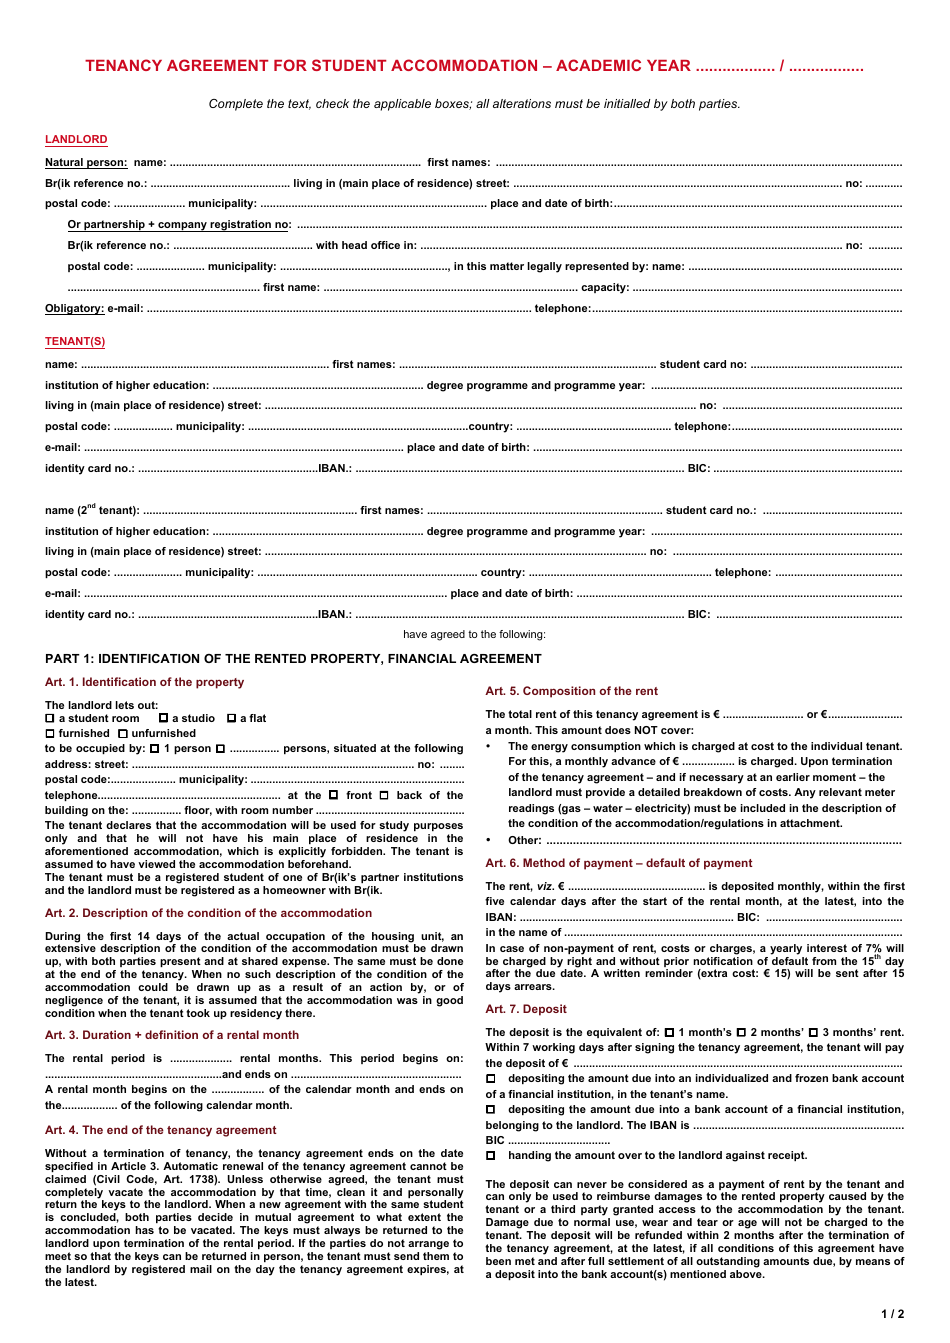 Tenancy Agreement Form for Student Accommodation - Br(Ik - Netherlands, Page 1